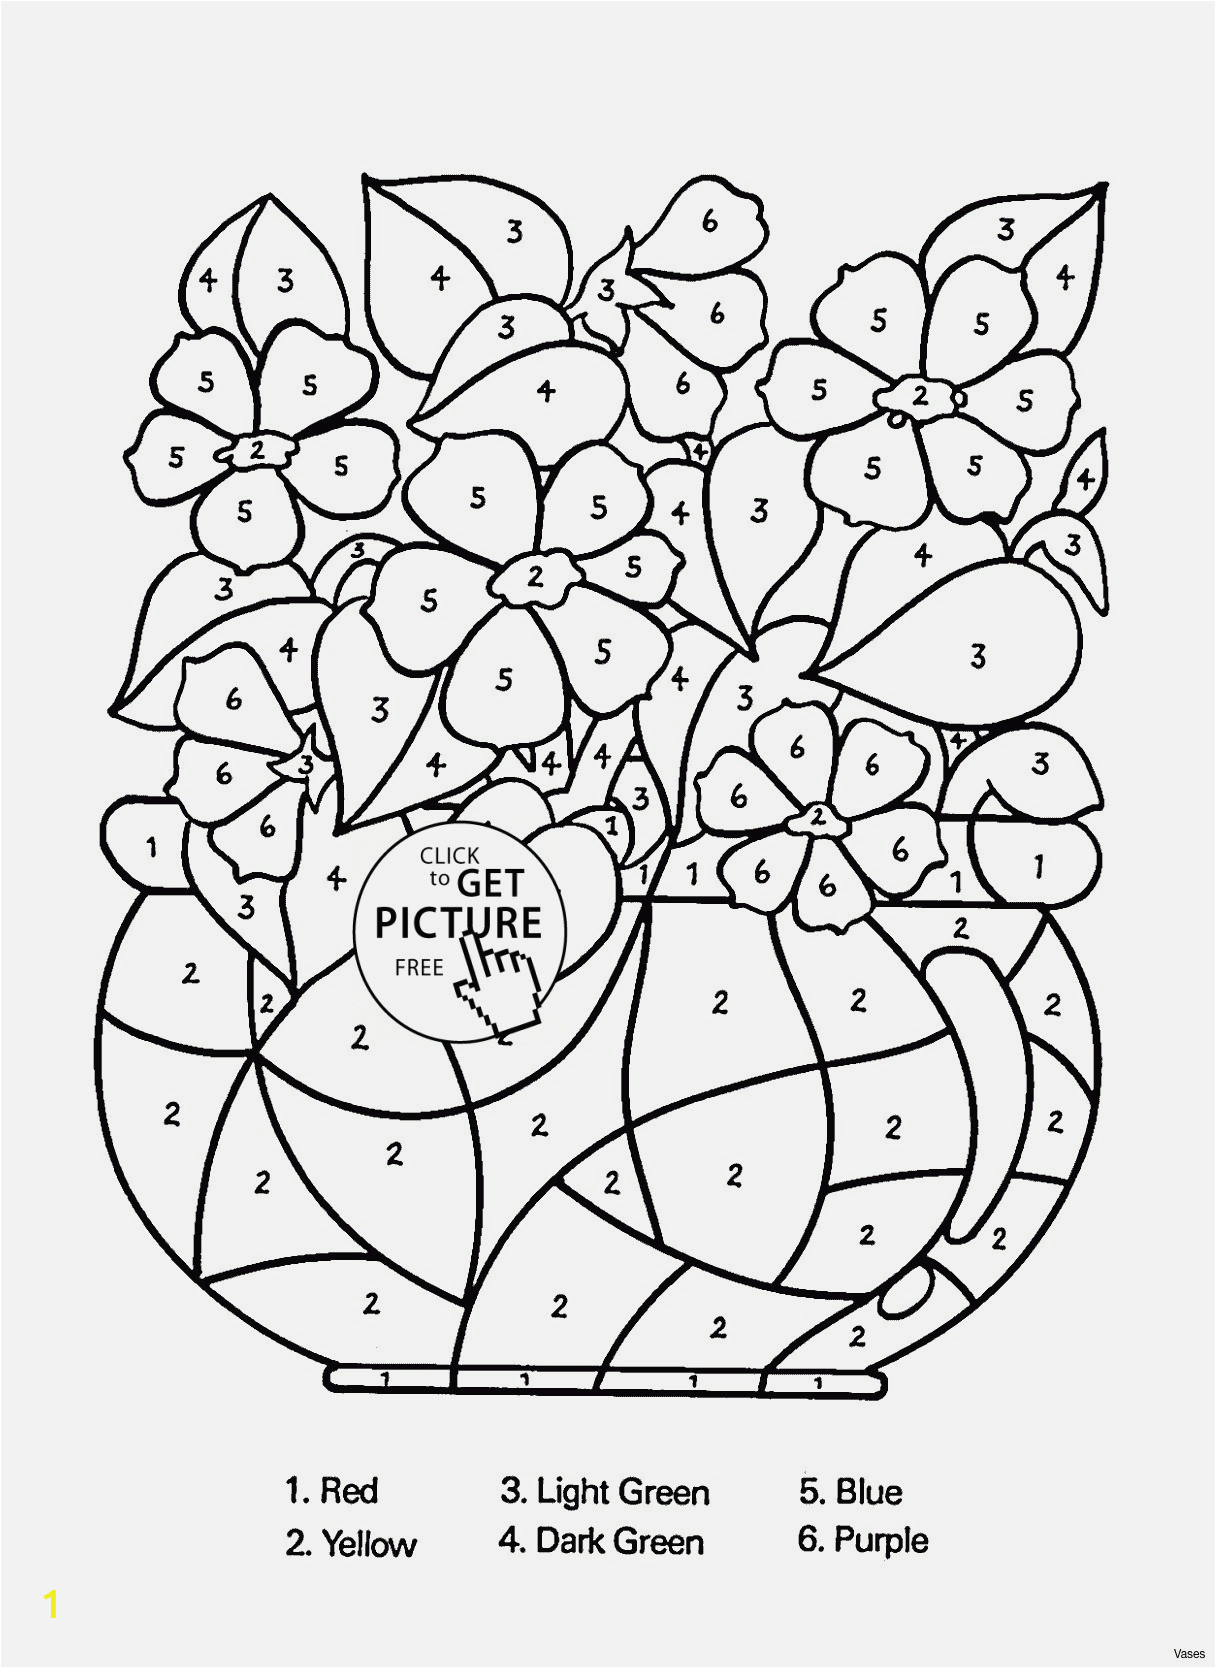 Free 2019 Coloring Pages New Coloring Pages Free Bird Unique Parrot Elegant